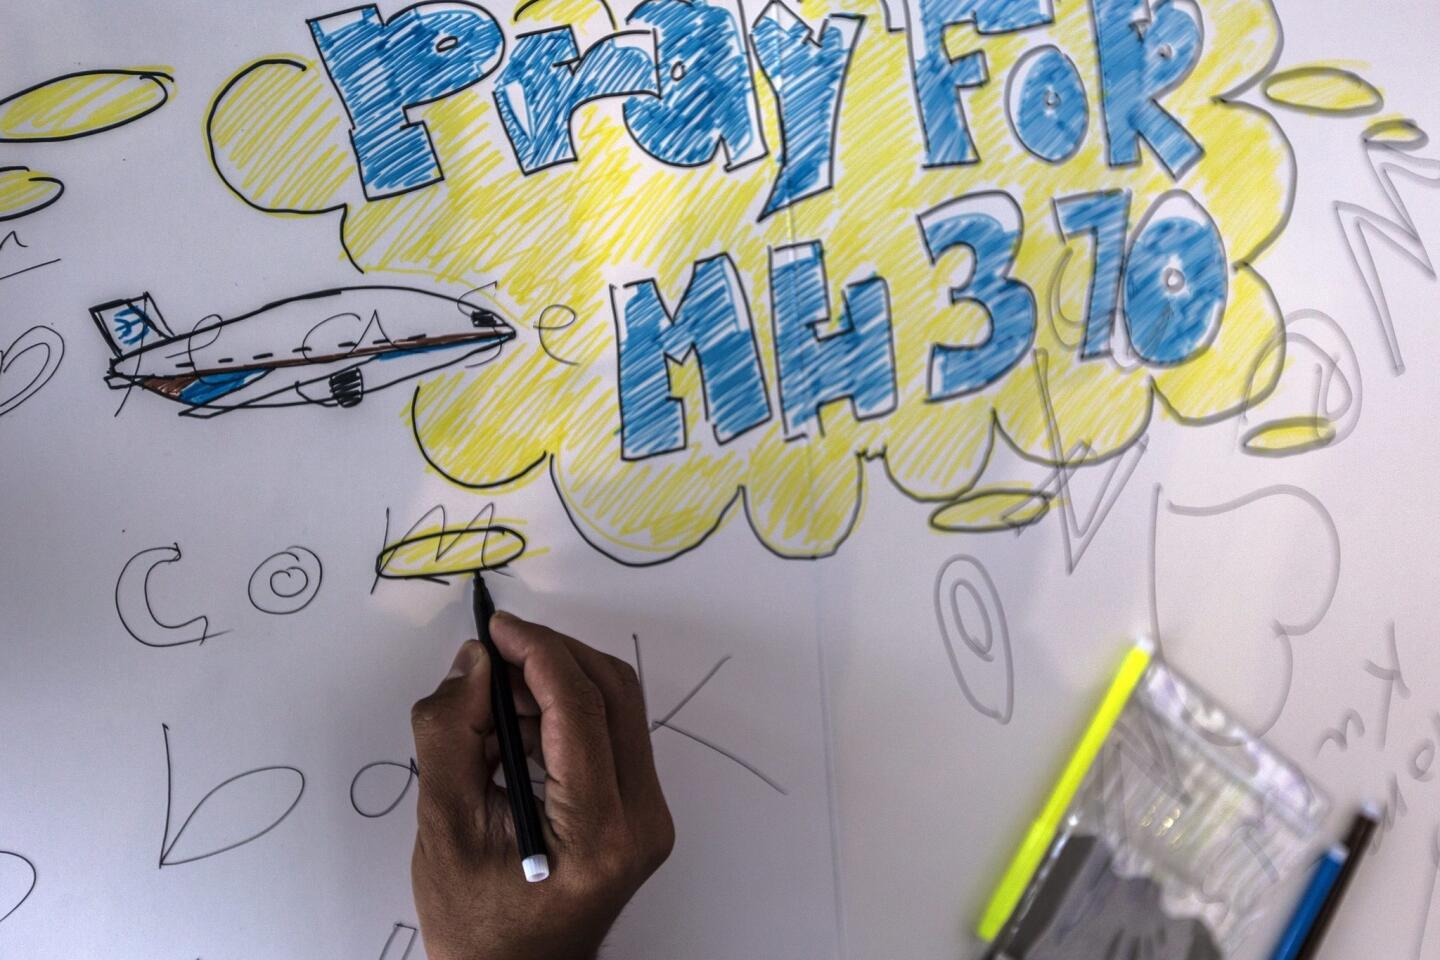 A visitor draws a message for the missing Malaysian Airlines plane on the wall of hope at Kuala Lumpur International Airport, Sepang, Selangor, Malaysia 19 March 2014.